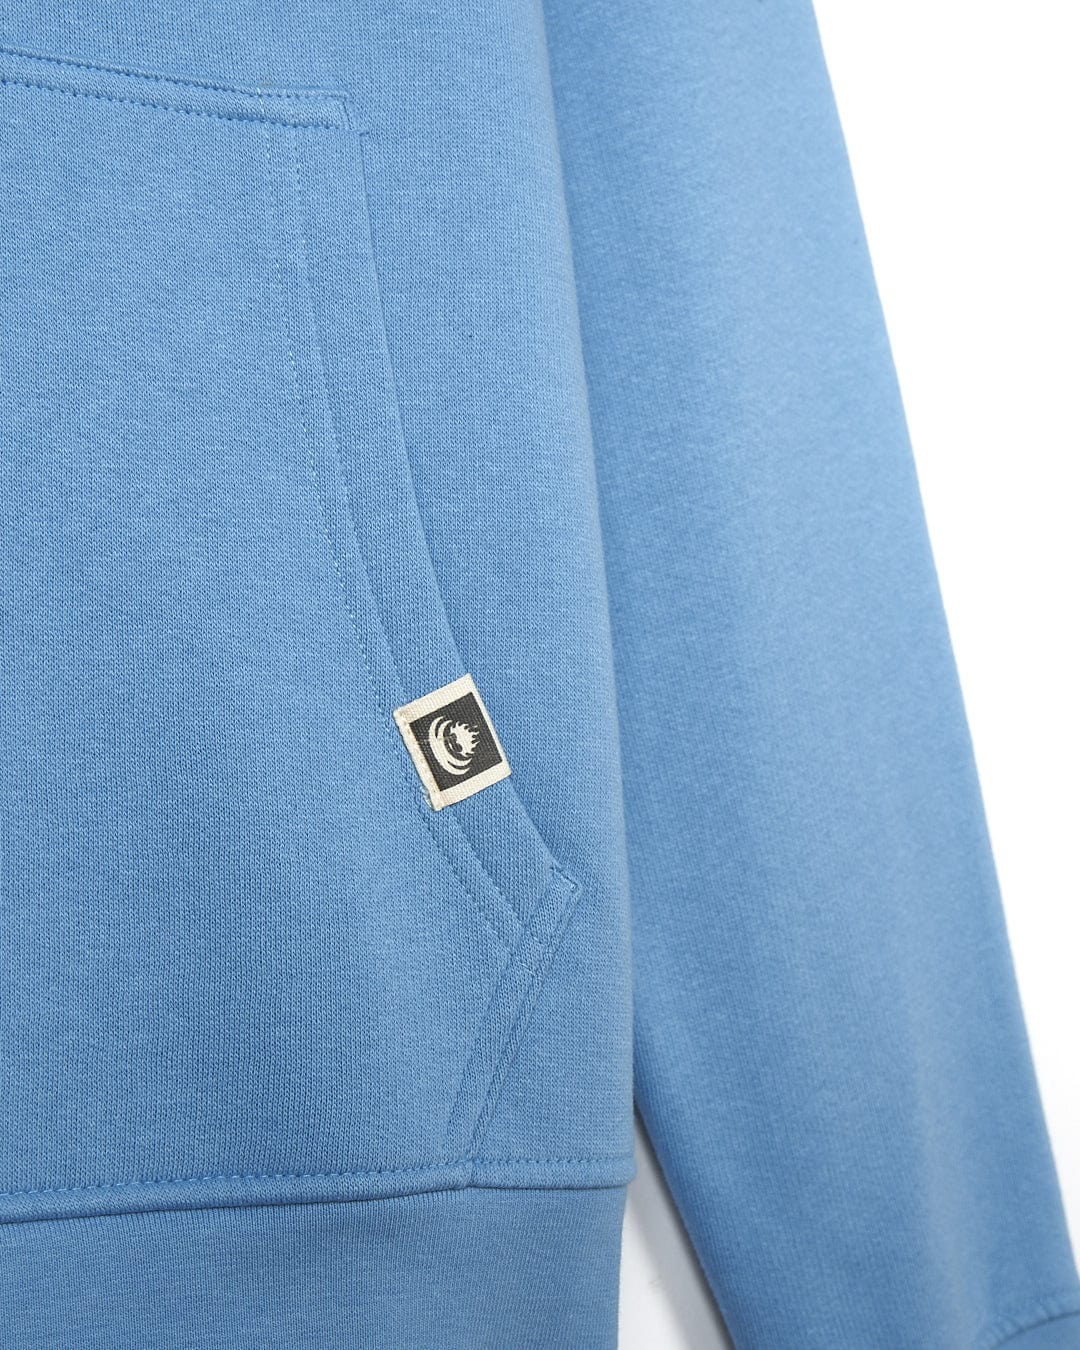 The back of a Saltrock Original 20 - Mens Pop Hoody - Light Blue with a logo on it.